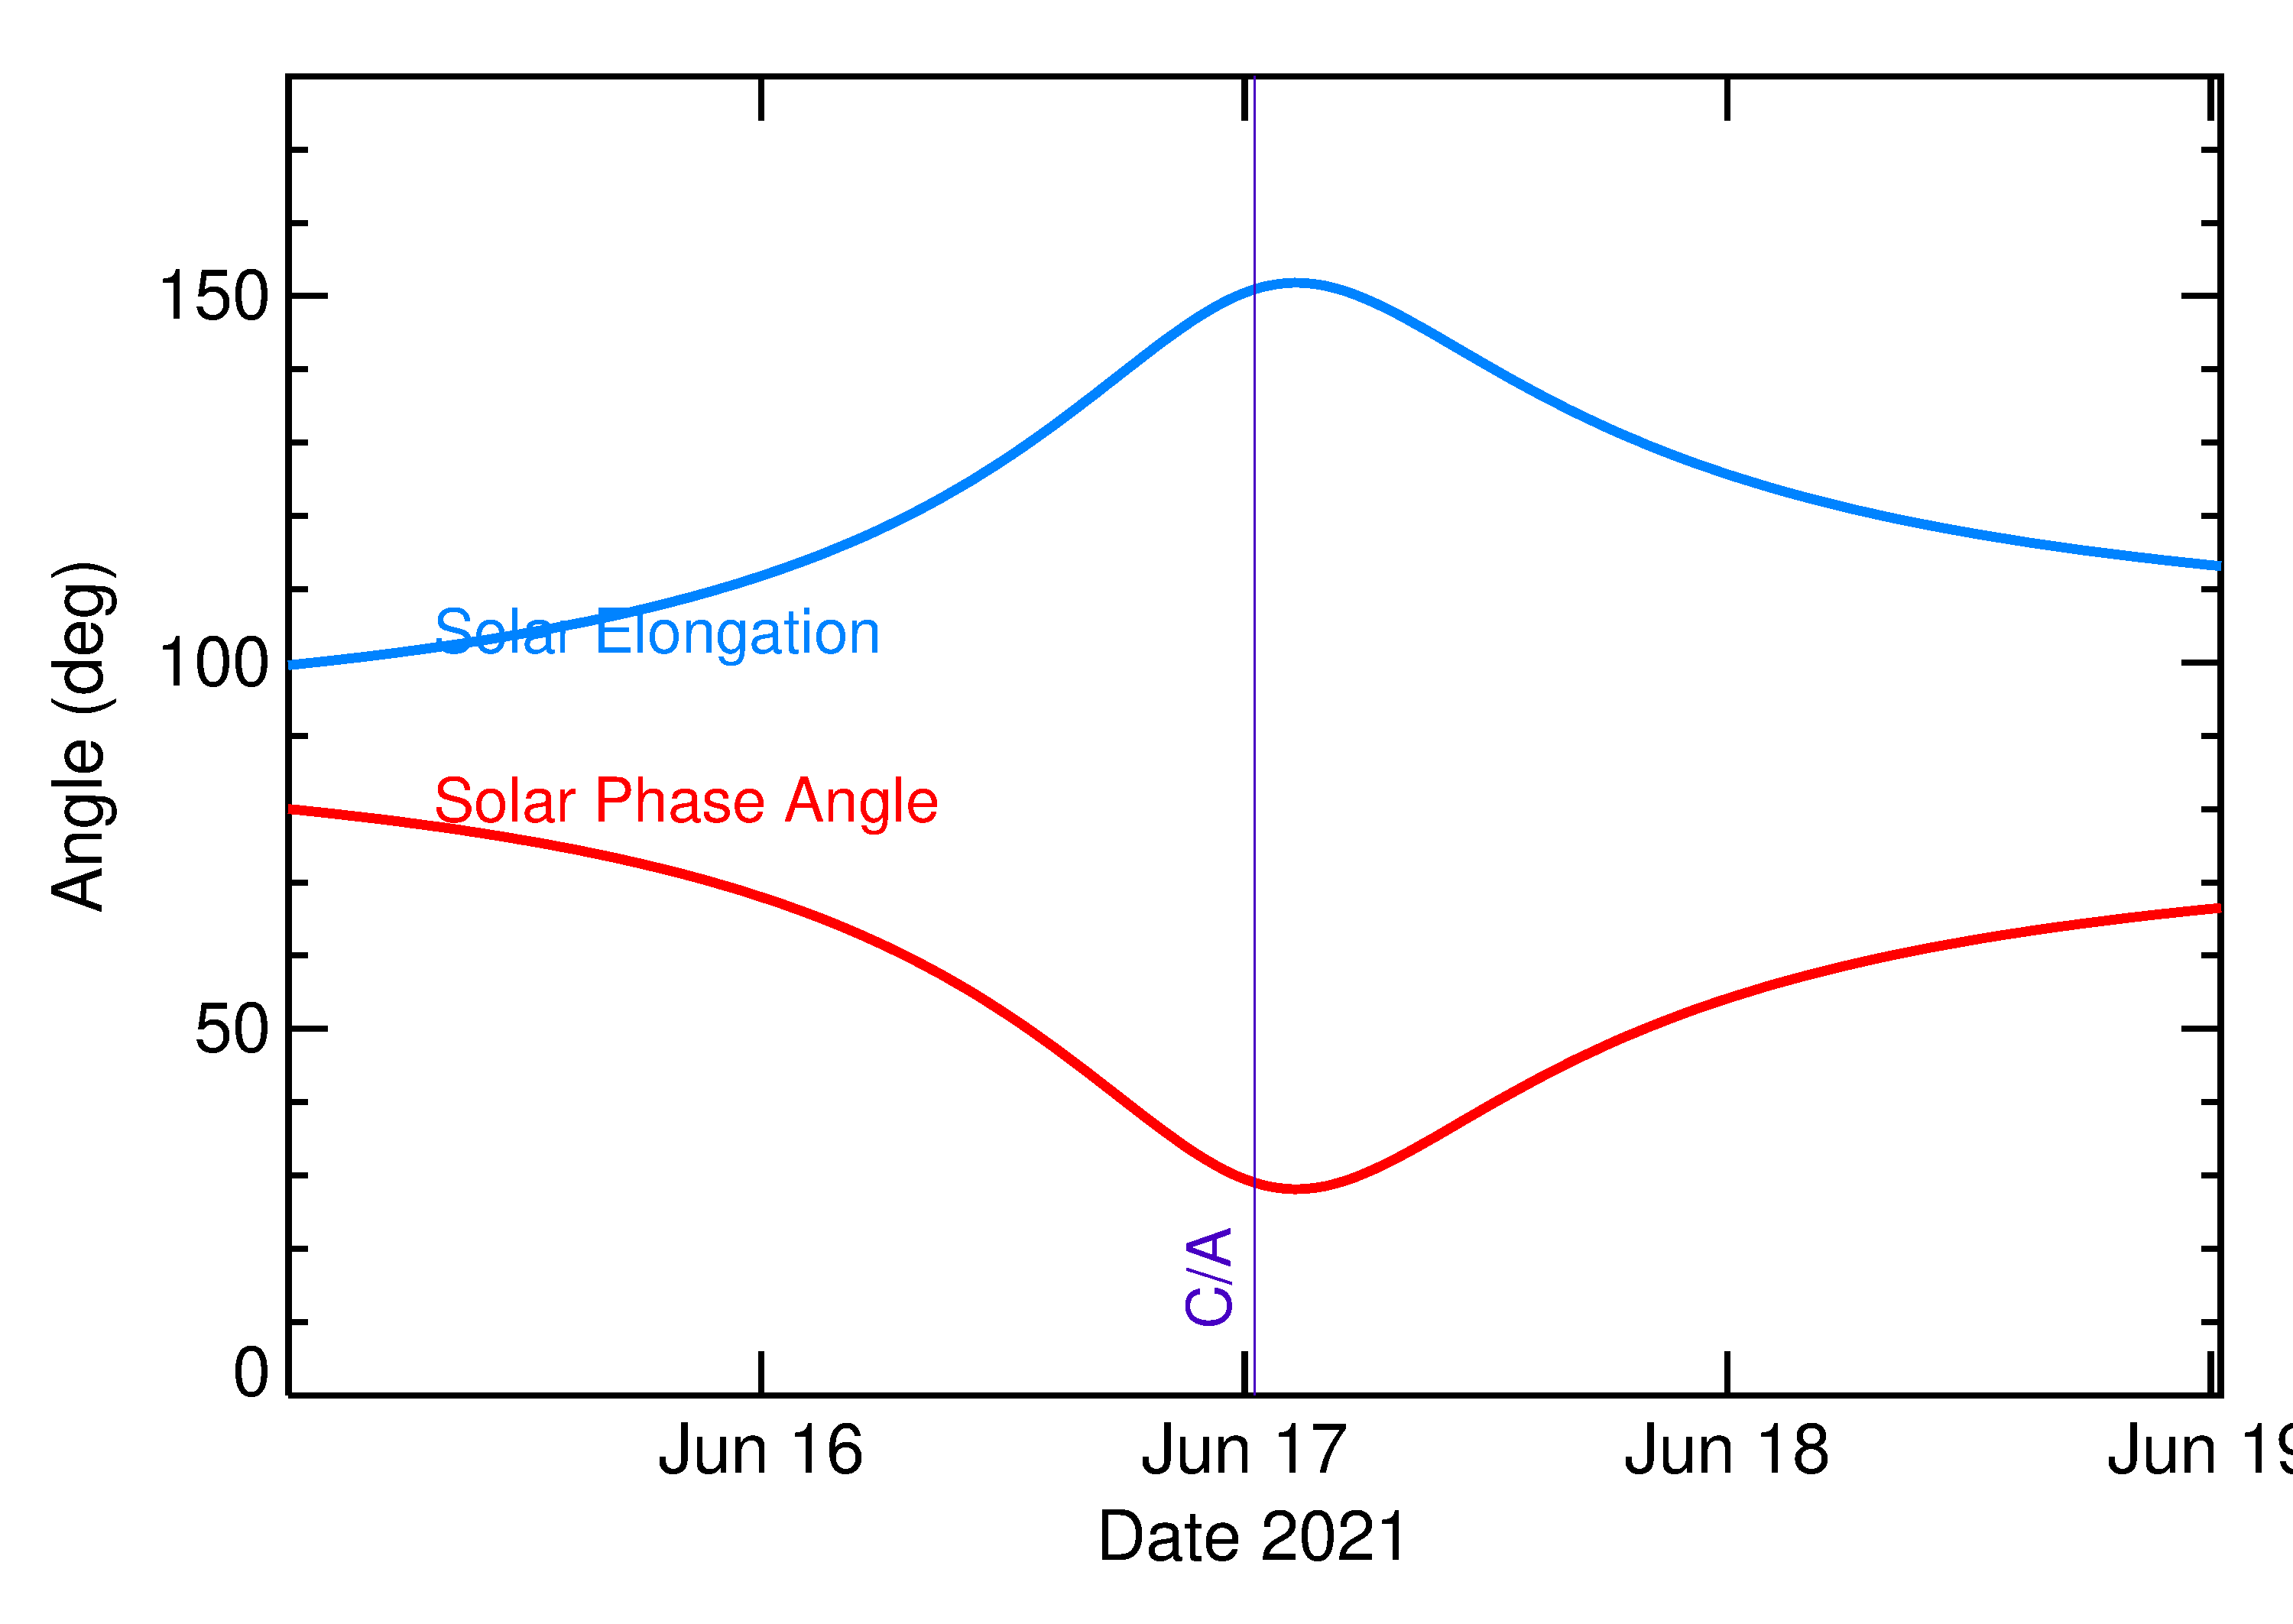 Solar Elongation and Solar Phase Angle of 2021 ME in the days around closest approach